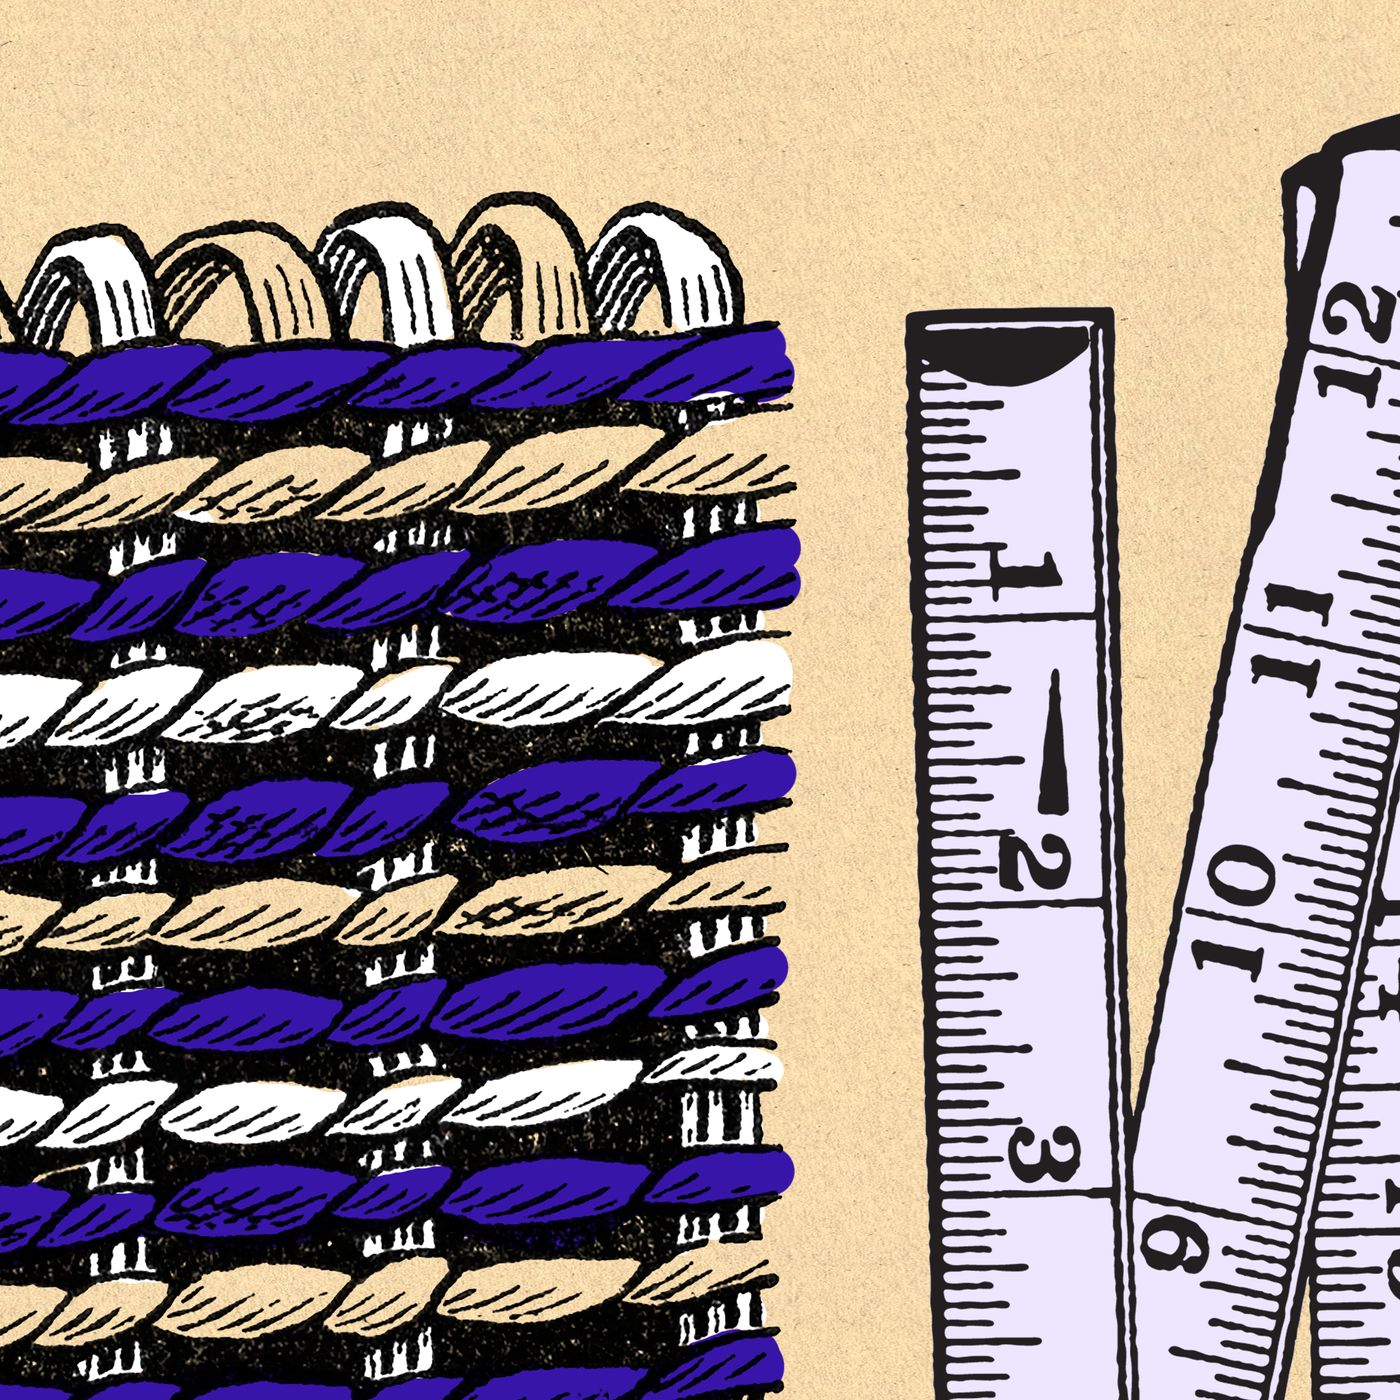 The thread count of a sheet can be meaningless, here's why